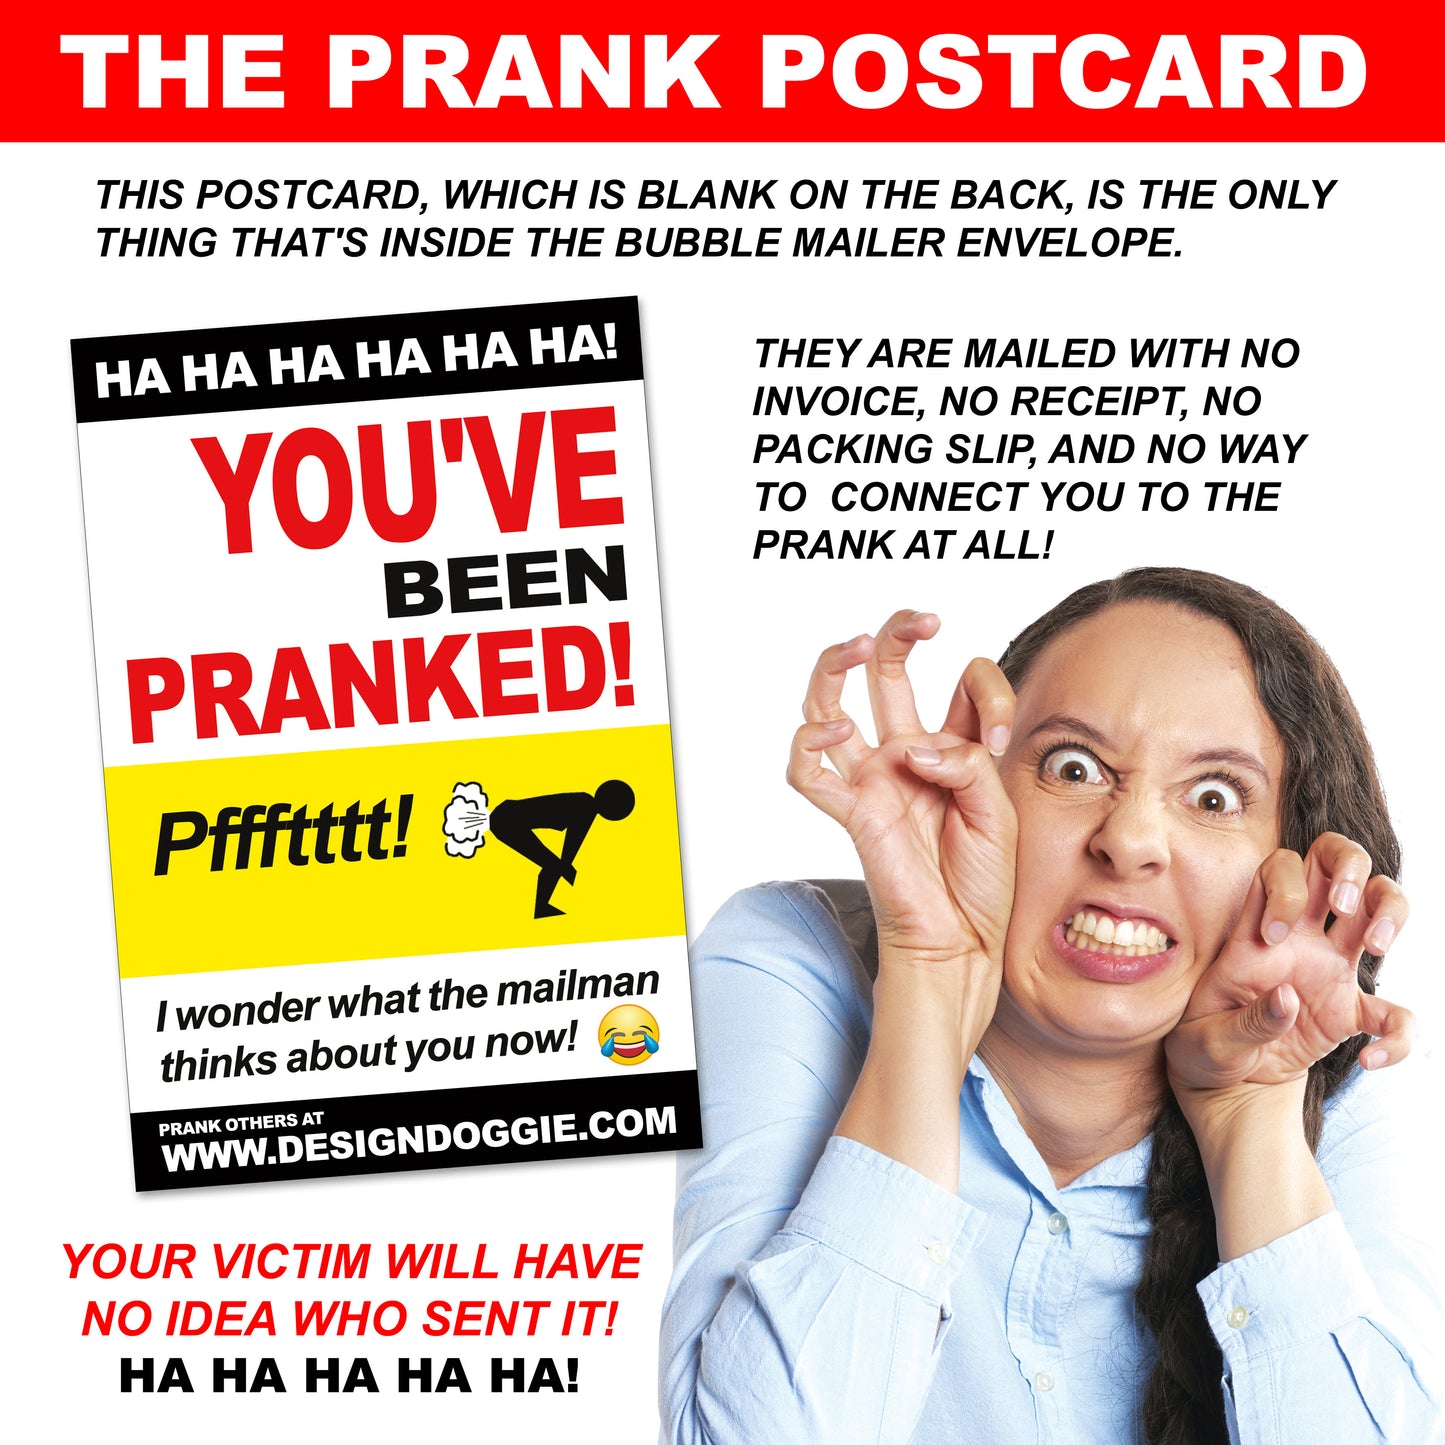 German Knuckle Club embarrassing prank envelope gets mailed directly to your victims 100% anonymously!